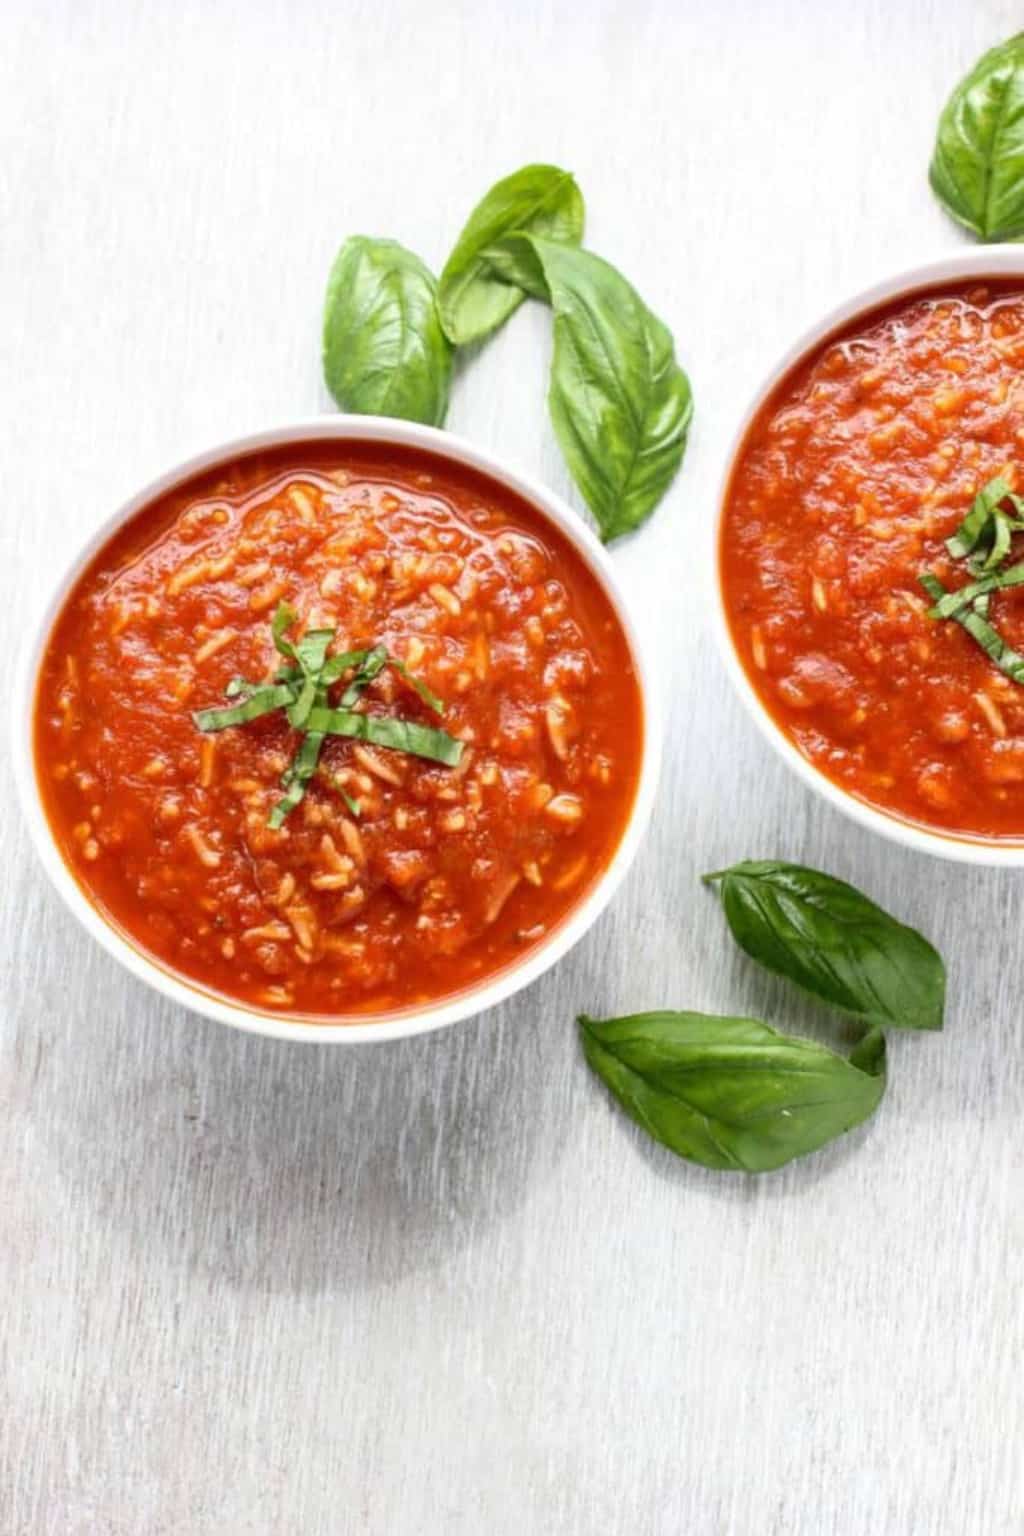 Two bowls of red tomato and rice soup